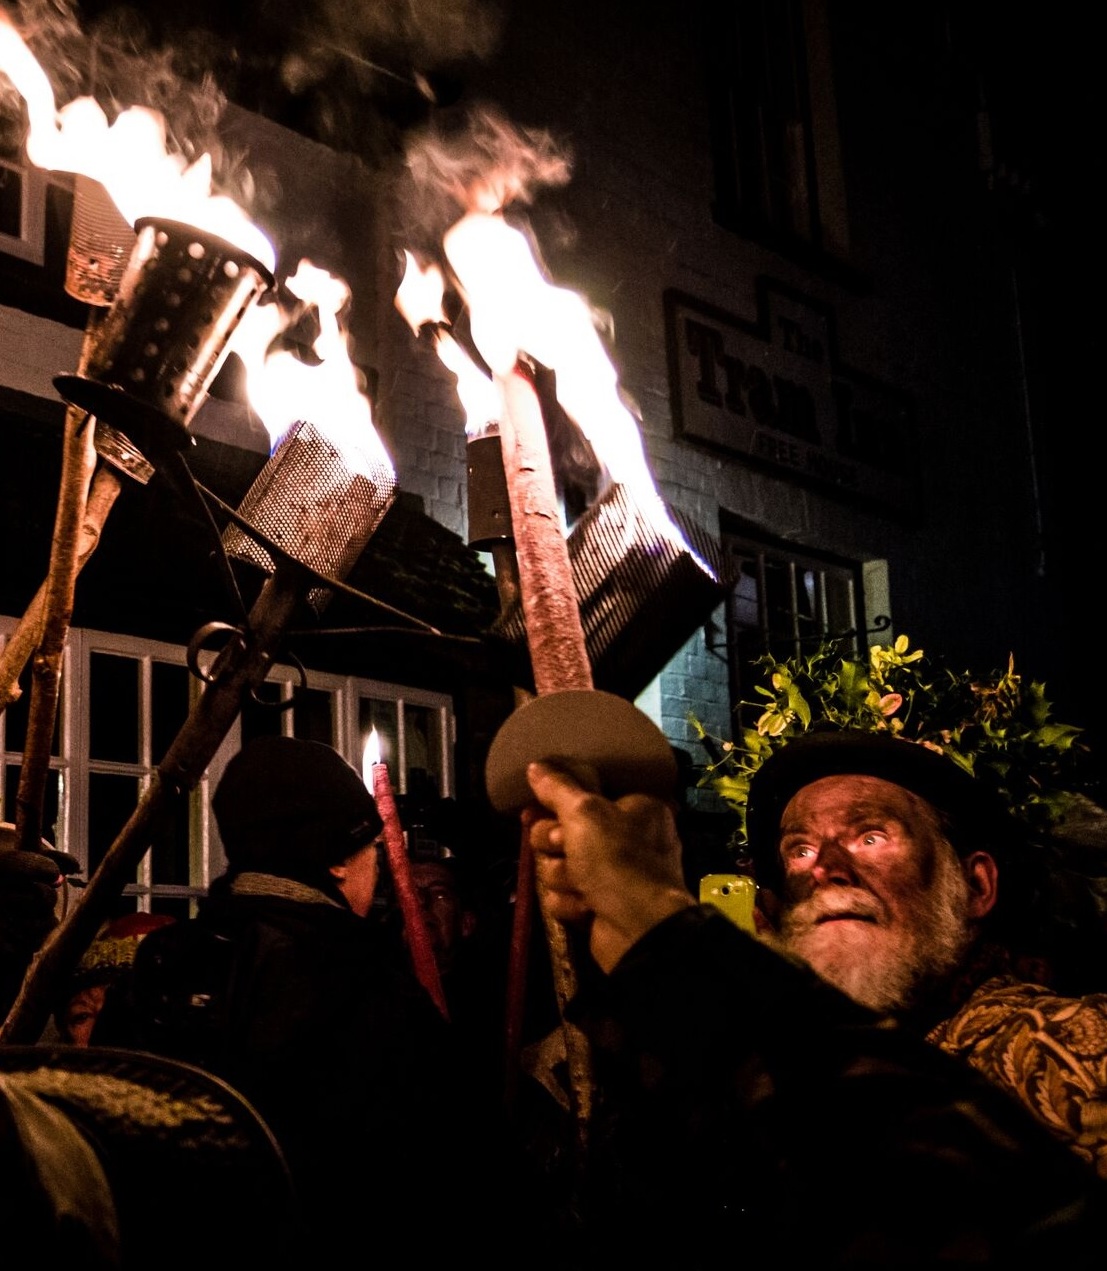 Wassail 'wakes up' Herefordshire's cider apple trees - Hereford Times